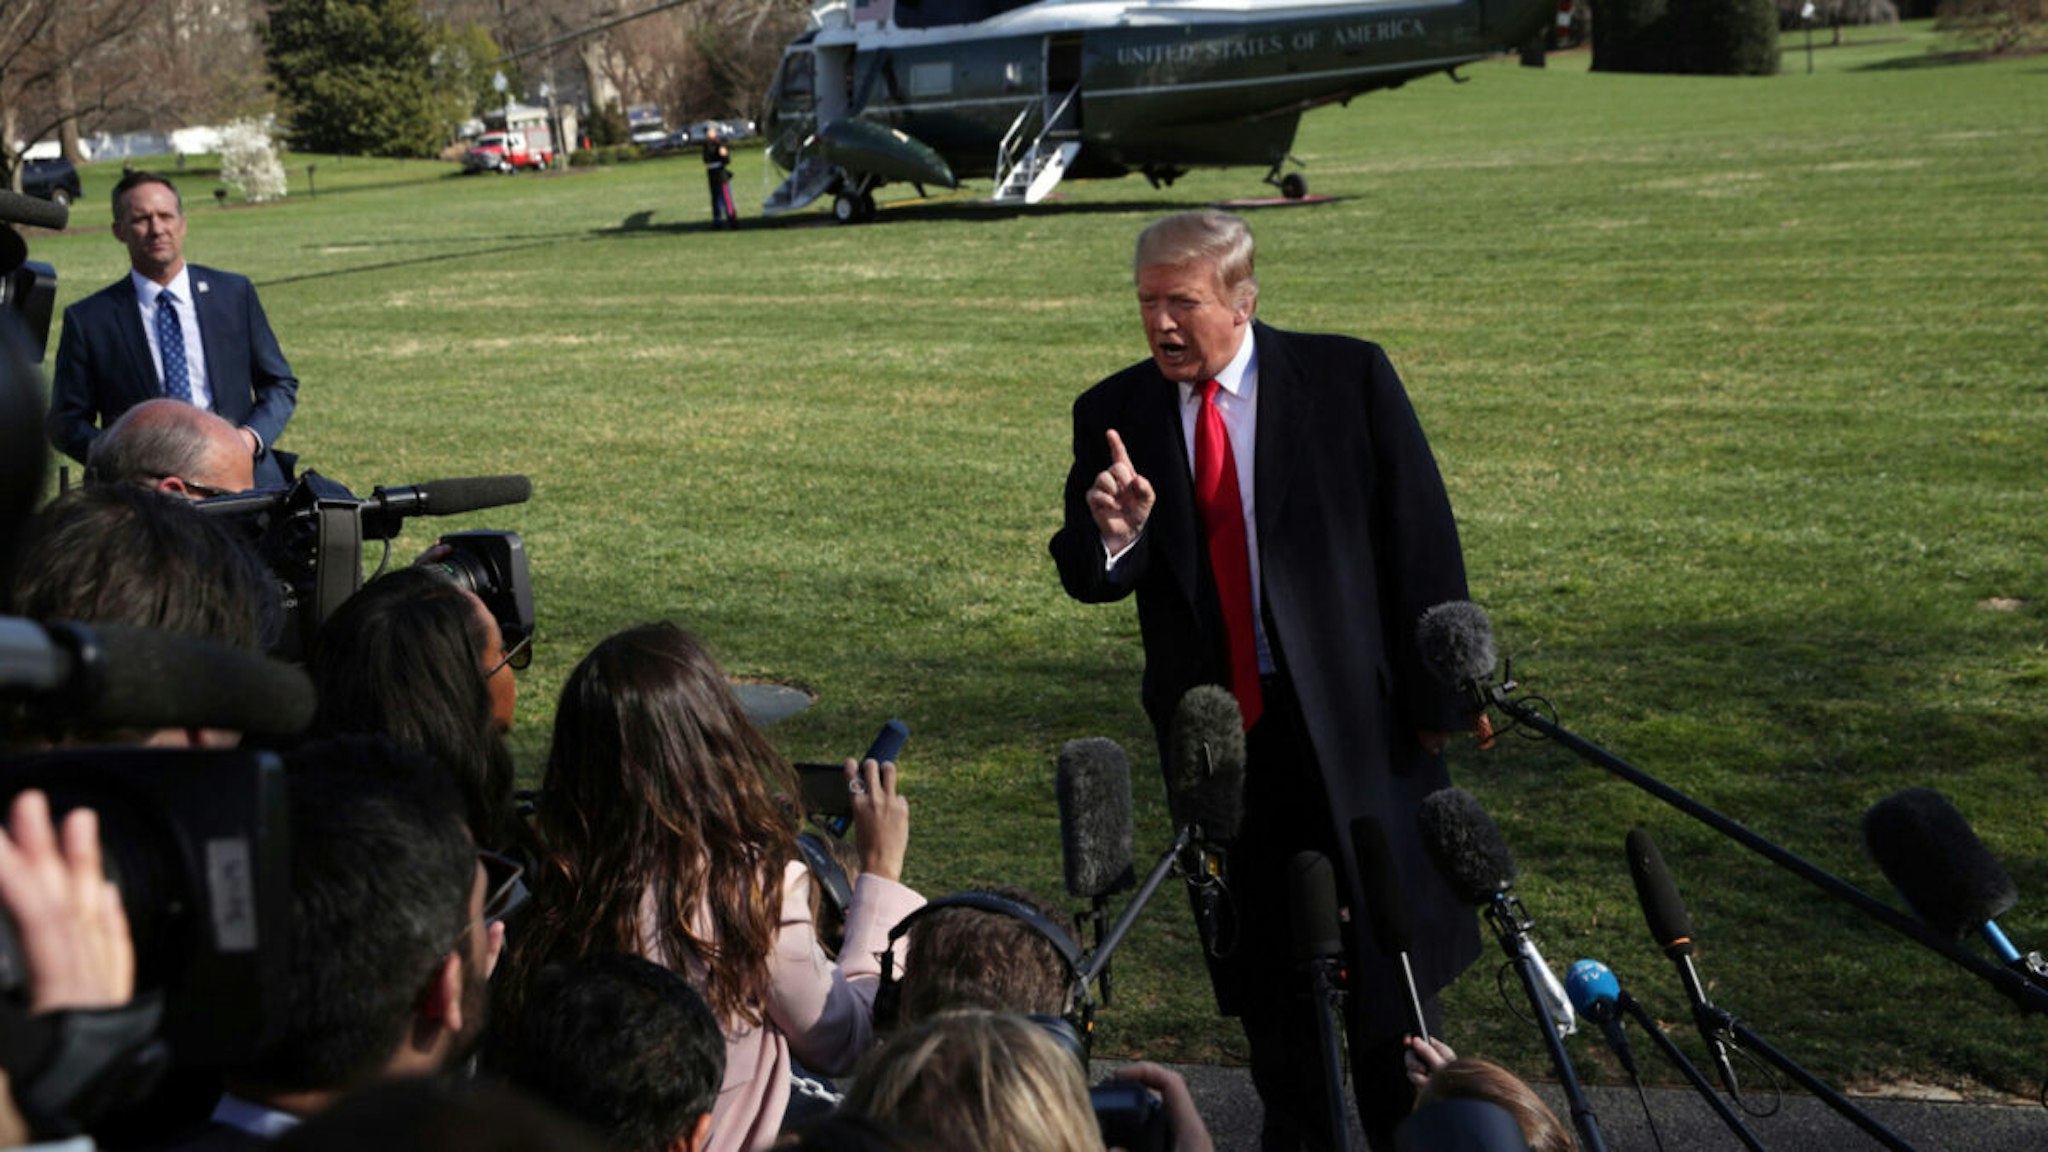 U.S. President Donald Trump speaks to members of the media on the South Lawn prior to his departure from the White House March 28, 2019 in Washington, DC.